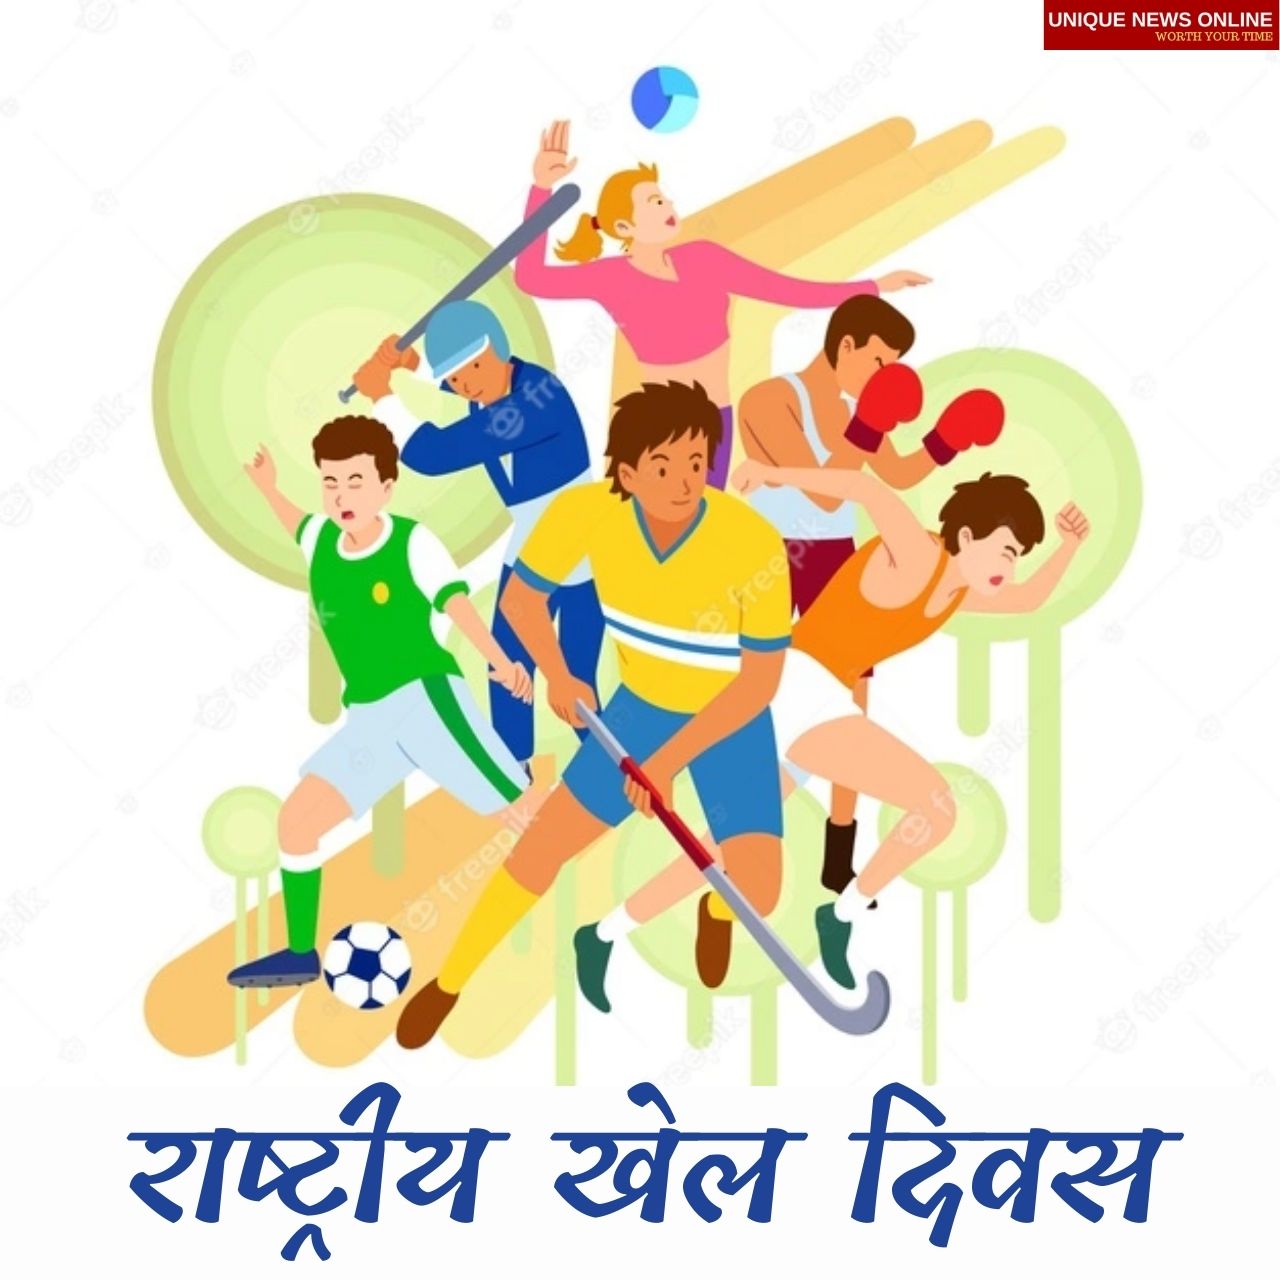 National Sports Day 2021 India: Best Hindi HD Images, Wishes, Quotes, Messages, and Greetings to Share